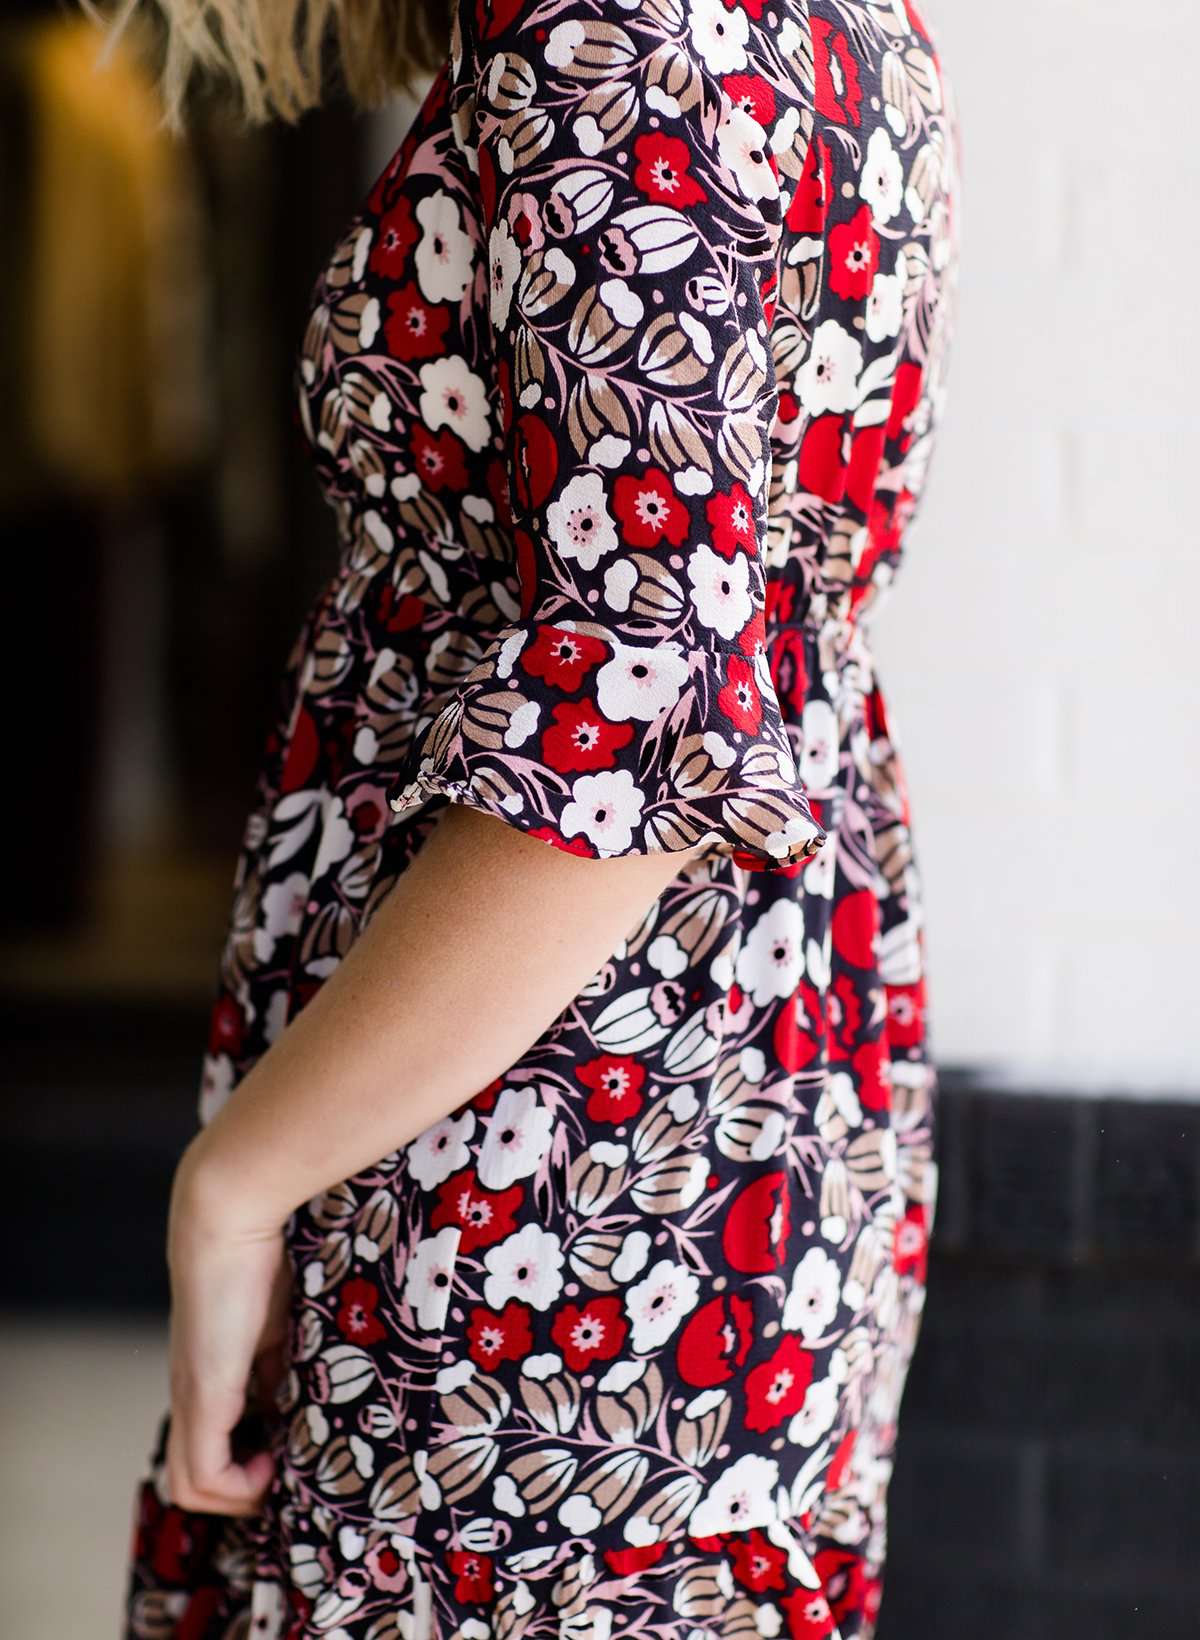 Woman wearing a midi length modest dress. This dress is a holiday red with poppy flowers and white flowers on it. It has a v-neck and ruffle 3/4 sleeves. This dress is paired with tall suede riding boots.